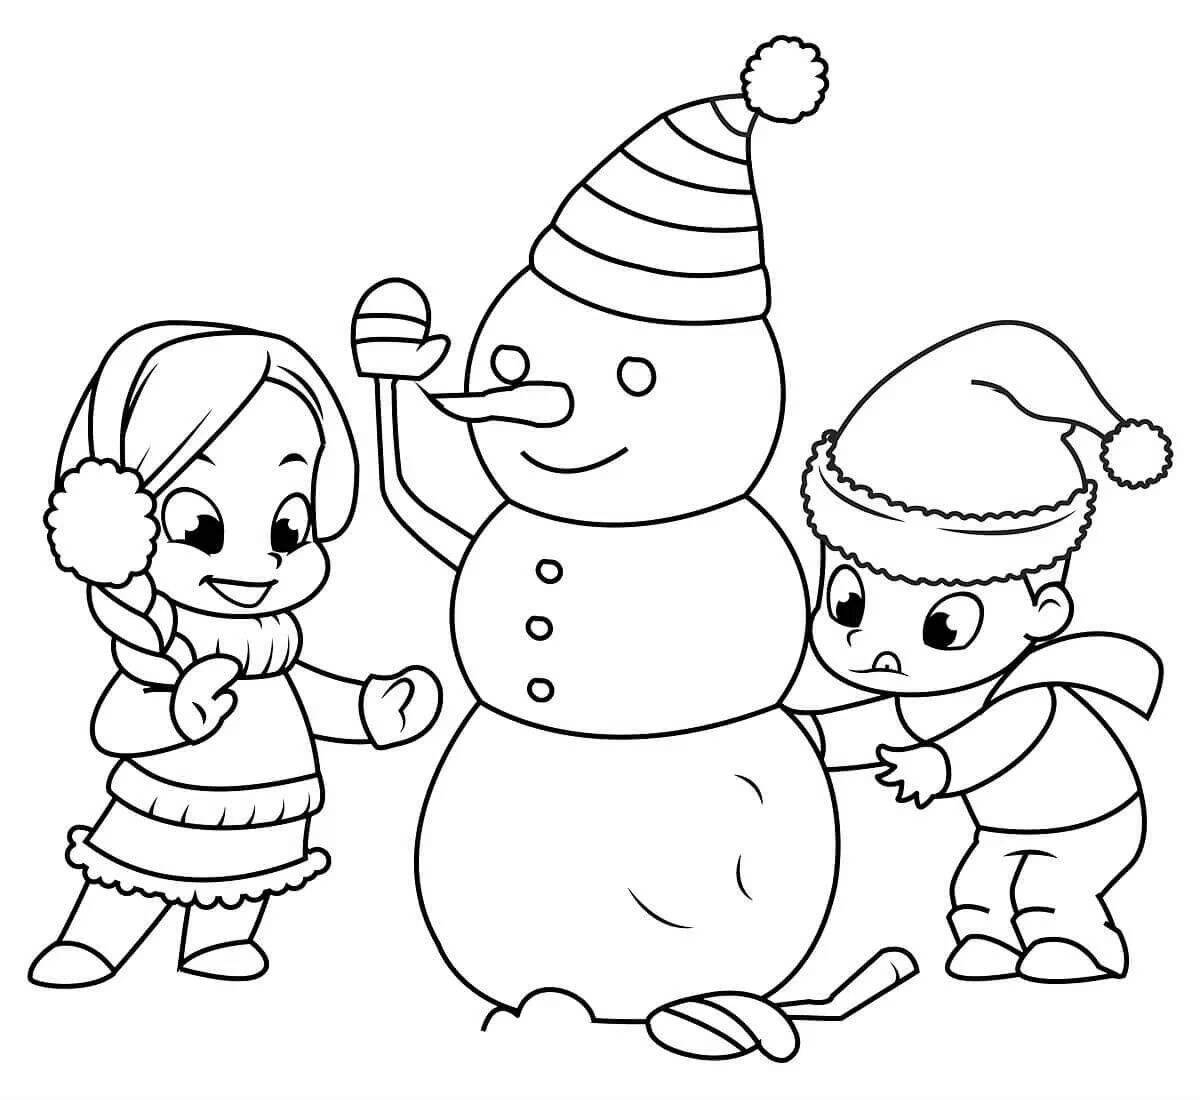 A wonderful snowman coloring book for kids 2 3